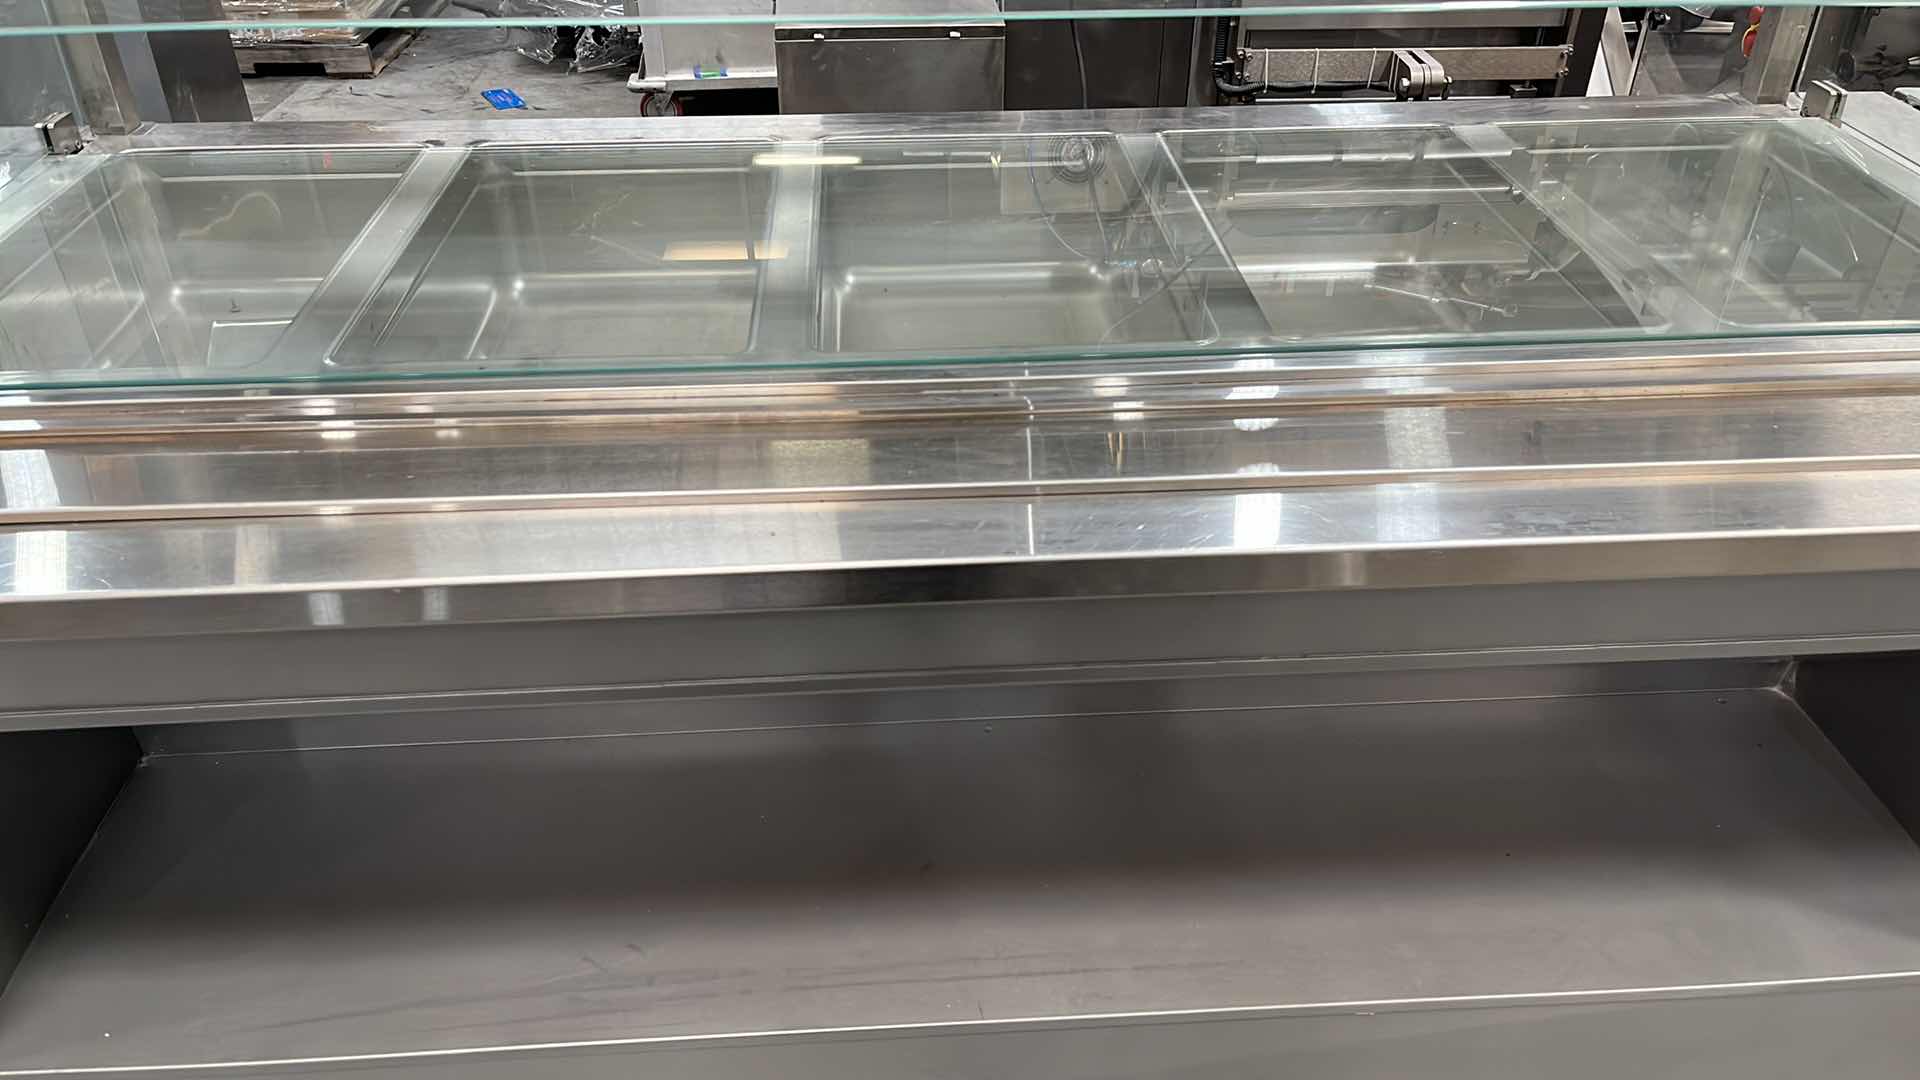 Photo 3 of HUSSMANN COMMERCIAL SELF-SERVICE FOOD COUNTER W HOT WELLS MODEL IM-05-I7-FH